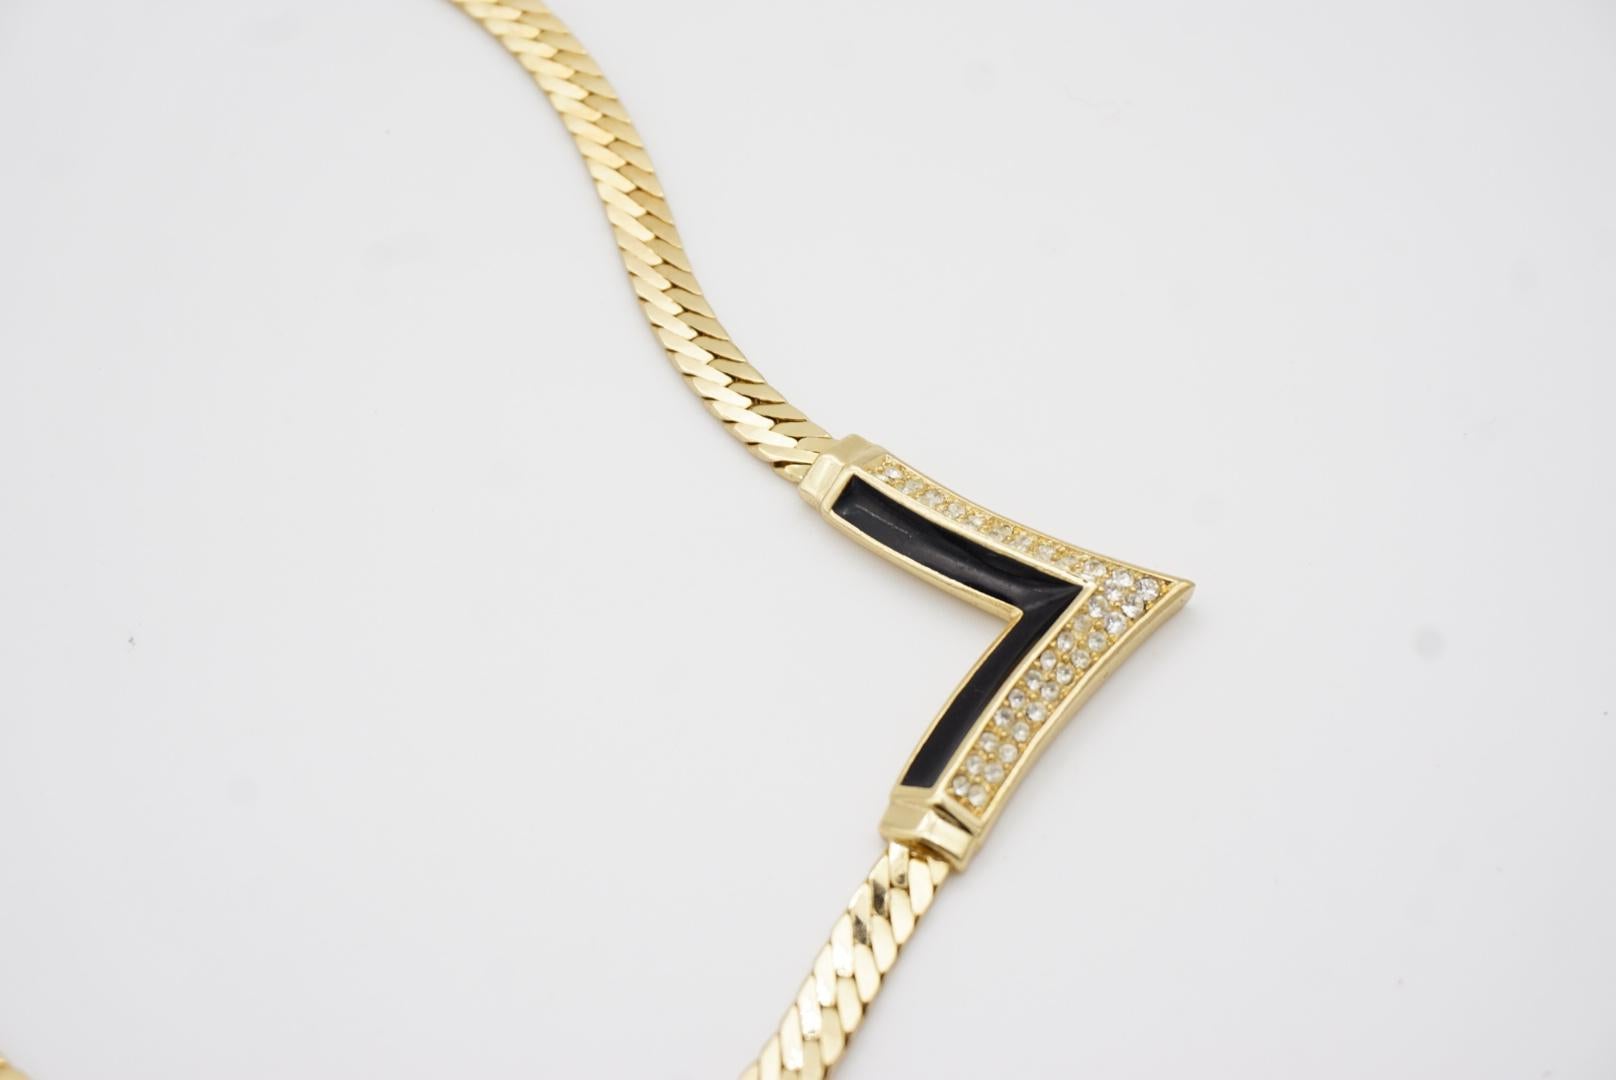 Christian Dior Vintage 1970s Black Crystal Arrow Triangle Pendant Gold Necklace For Sale 2